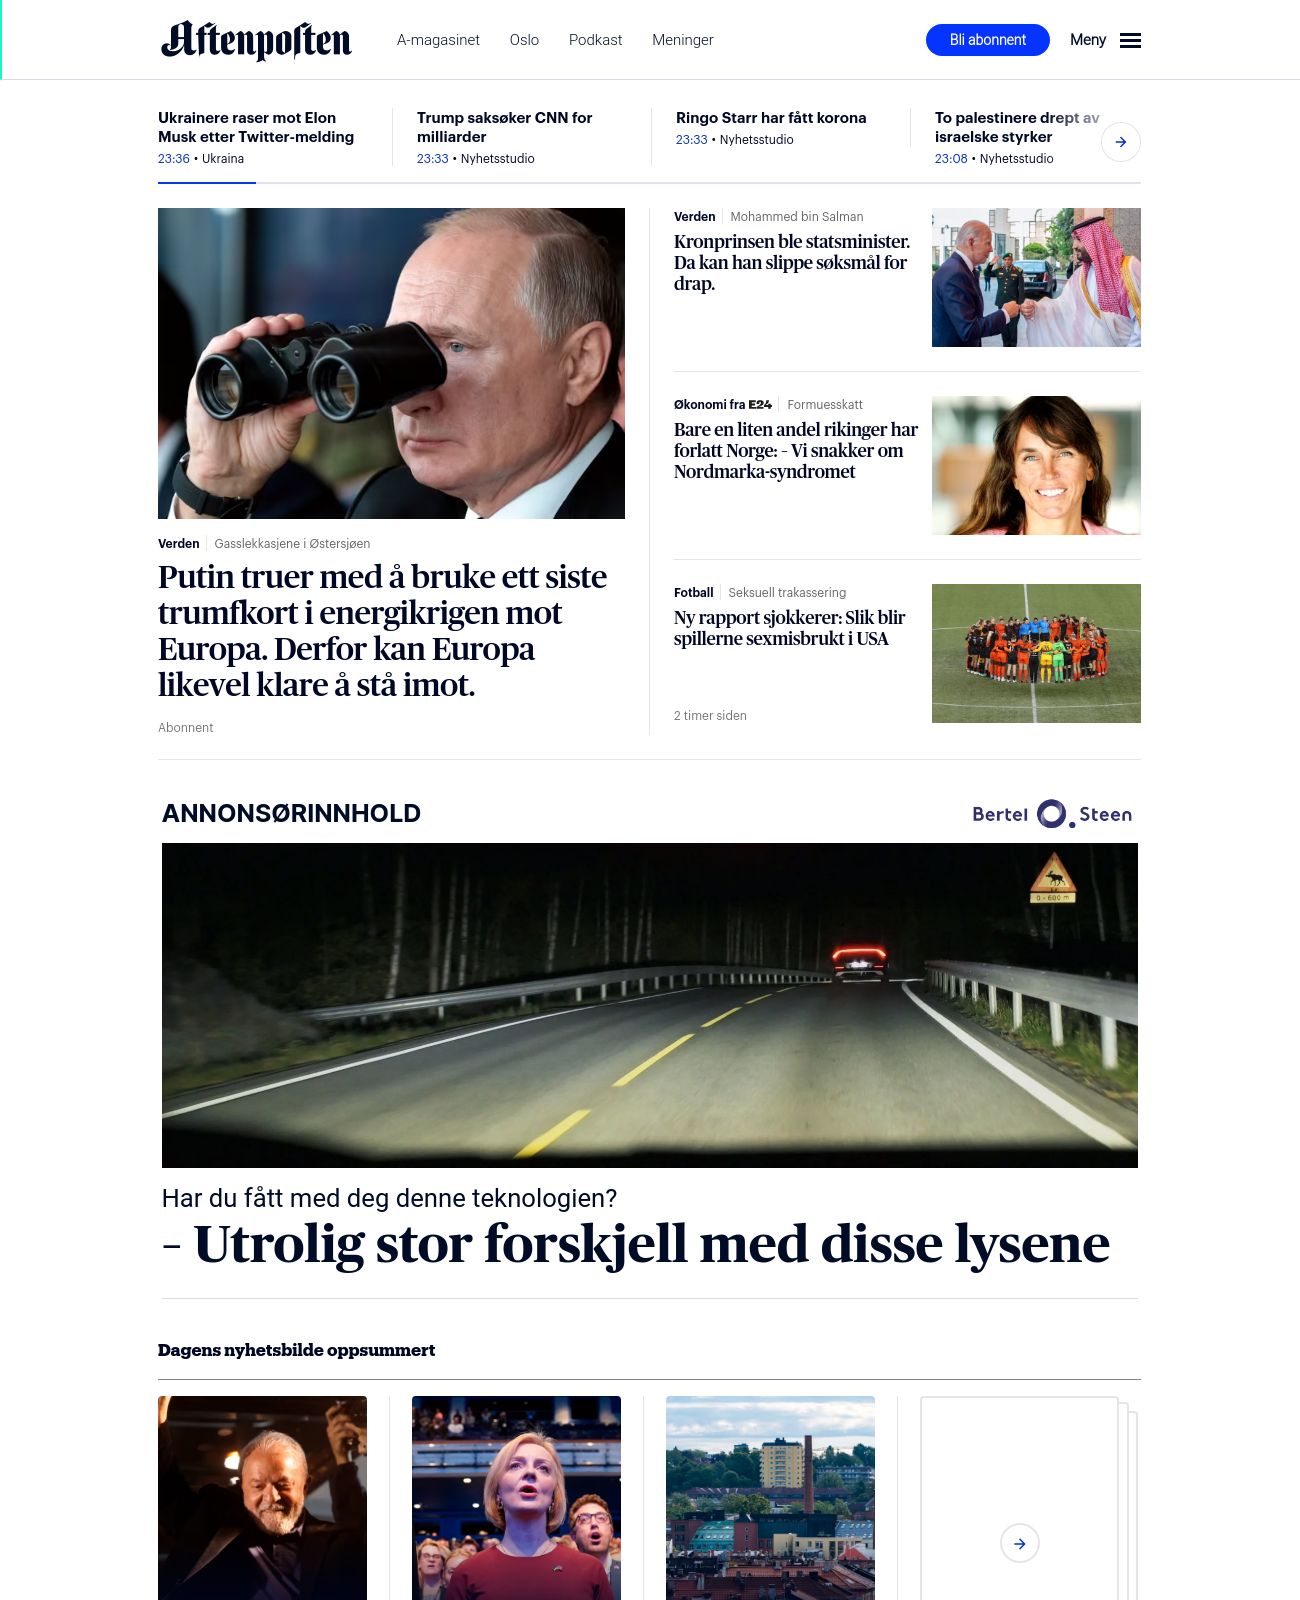 Aftenposten at 2022-10-04 00:54:26+02:00 local time